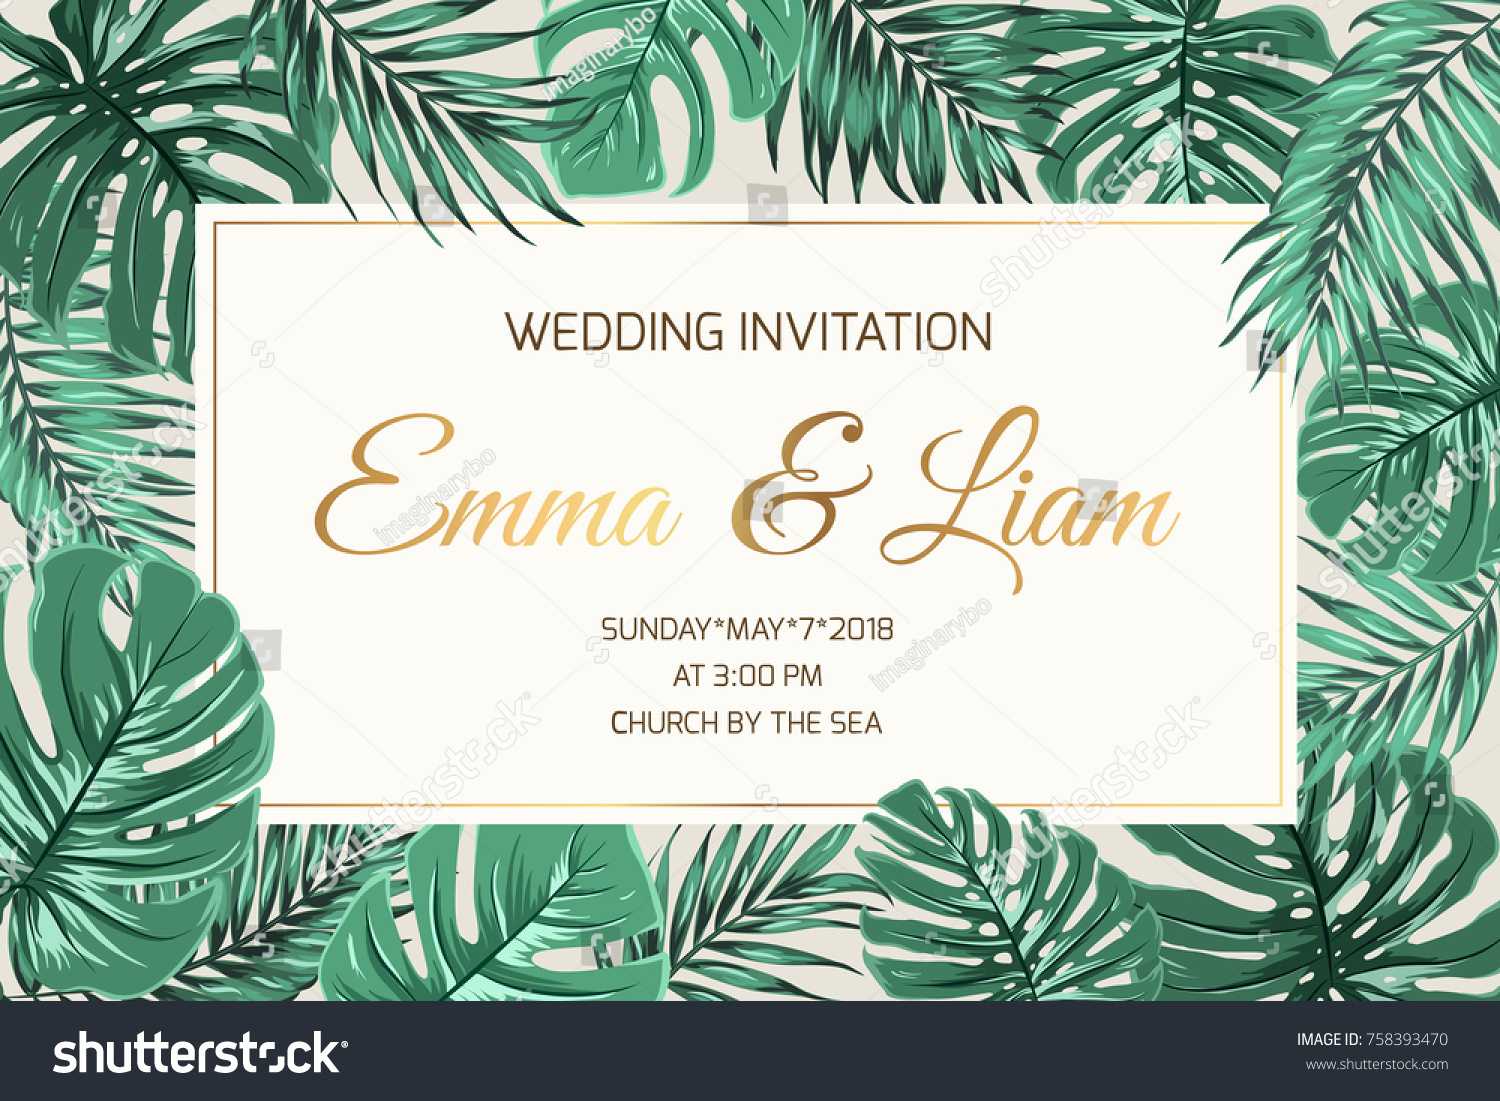 Wedding Marriage Event Invitation Card Template Stock Vector With Regard To Event Invitation Card Template